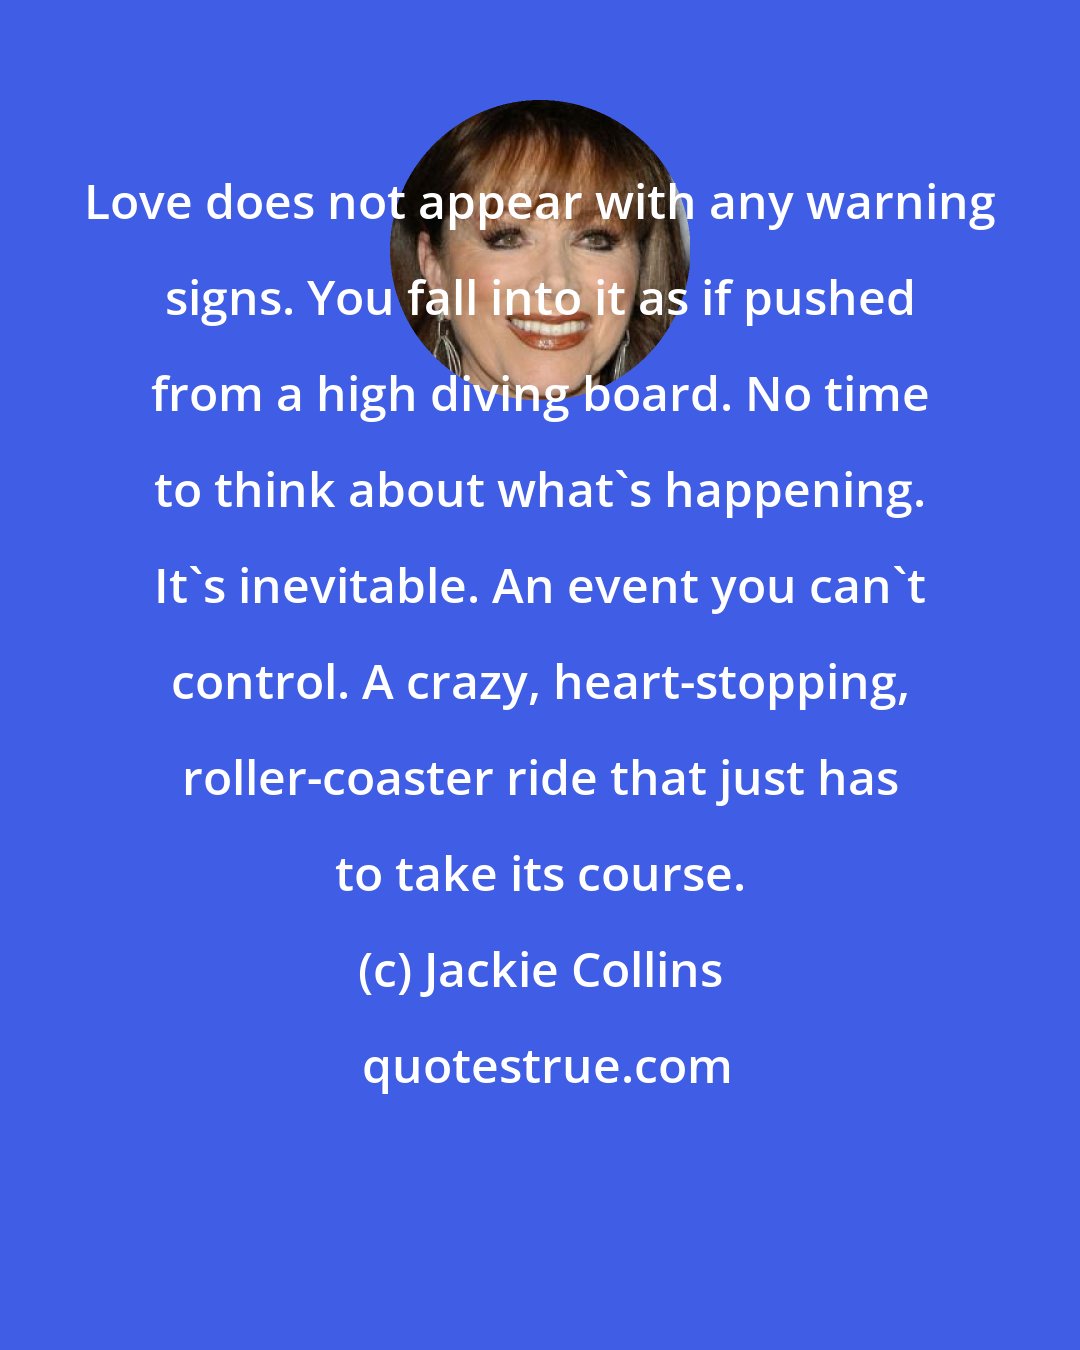 Jackie Collins: Love does not appear with any warning signs. You fall into it as if pushed from a high diving board. No time to think about what's happening. It's inevitable. An event you can't control. A crazy, heart-stopping, roller-coaster ride that just has to take its course.